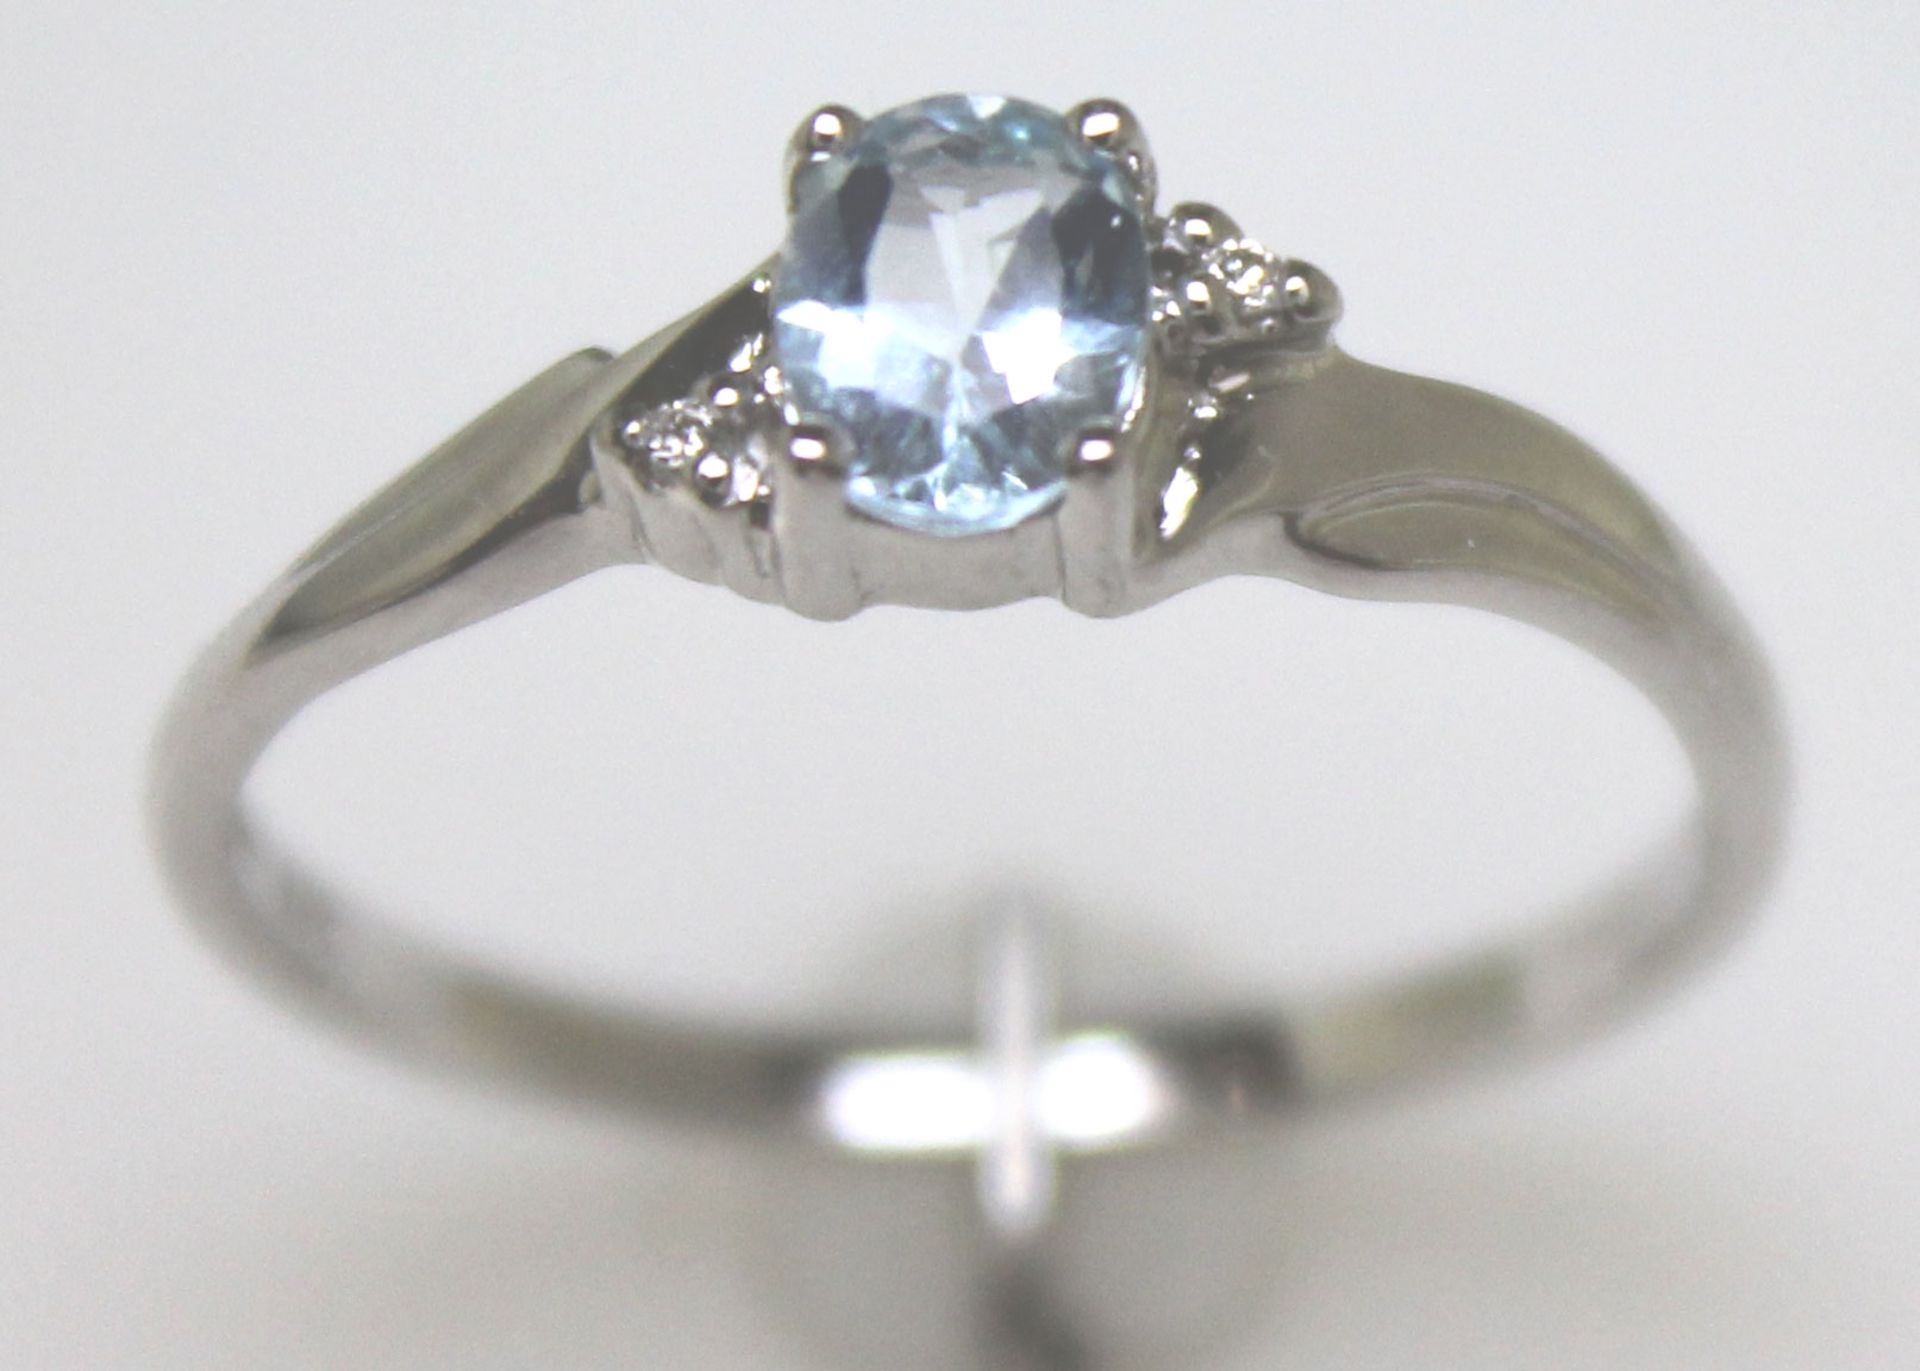 9ct White Gold Diamond and Blue Topaz Ring 0.01 Carats - Valued by GIE £755.00 - This ring - Image 5 of 9